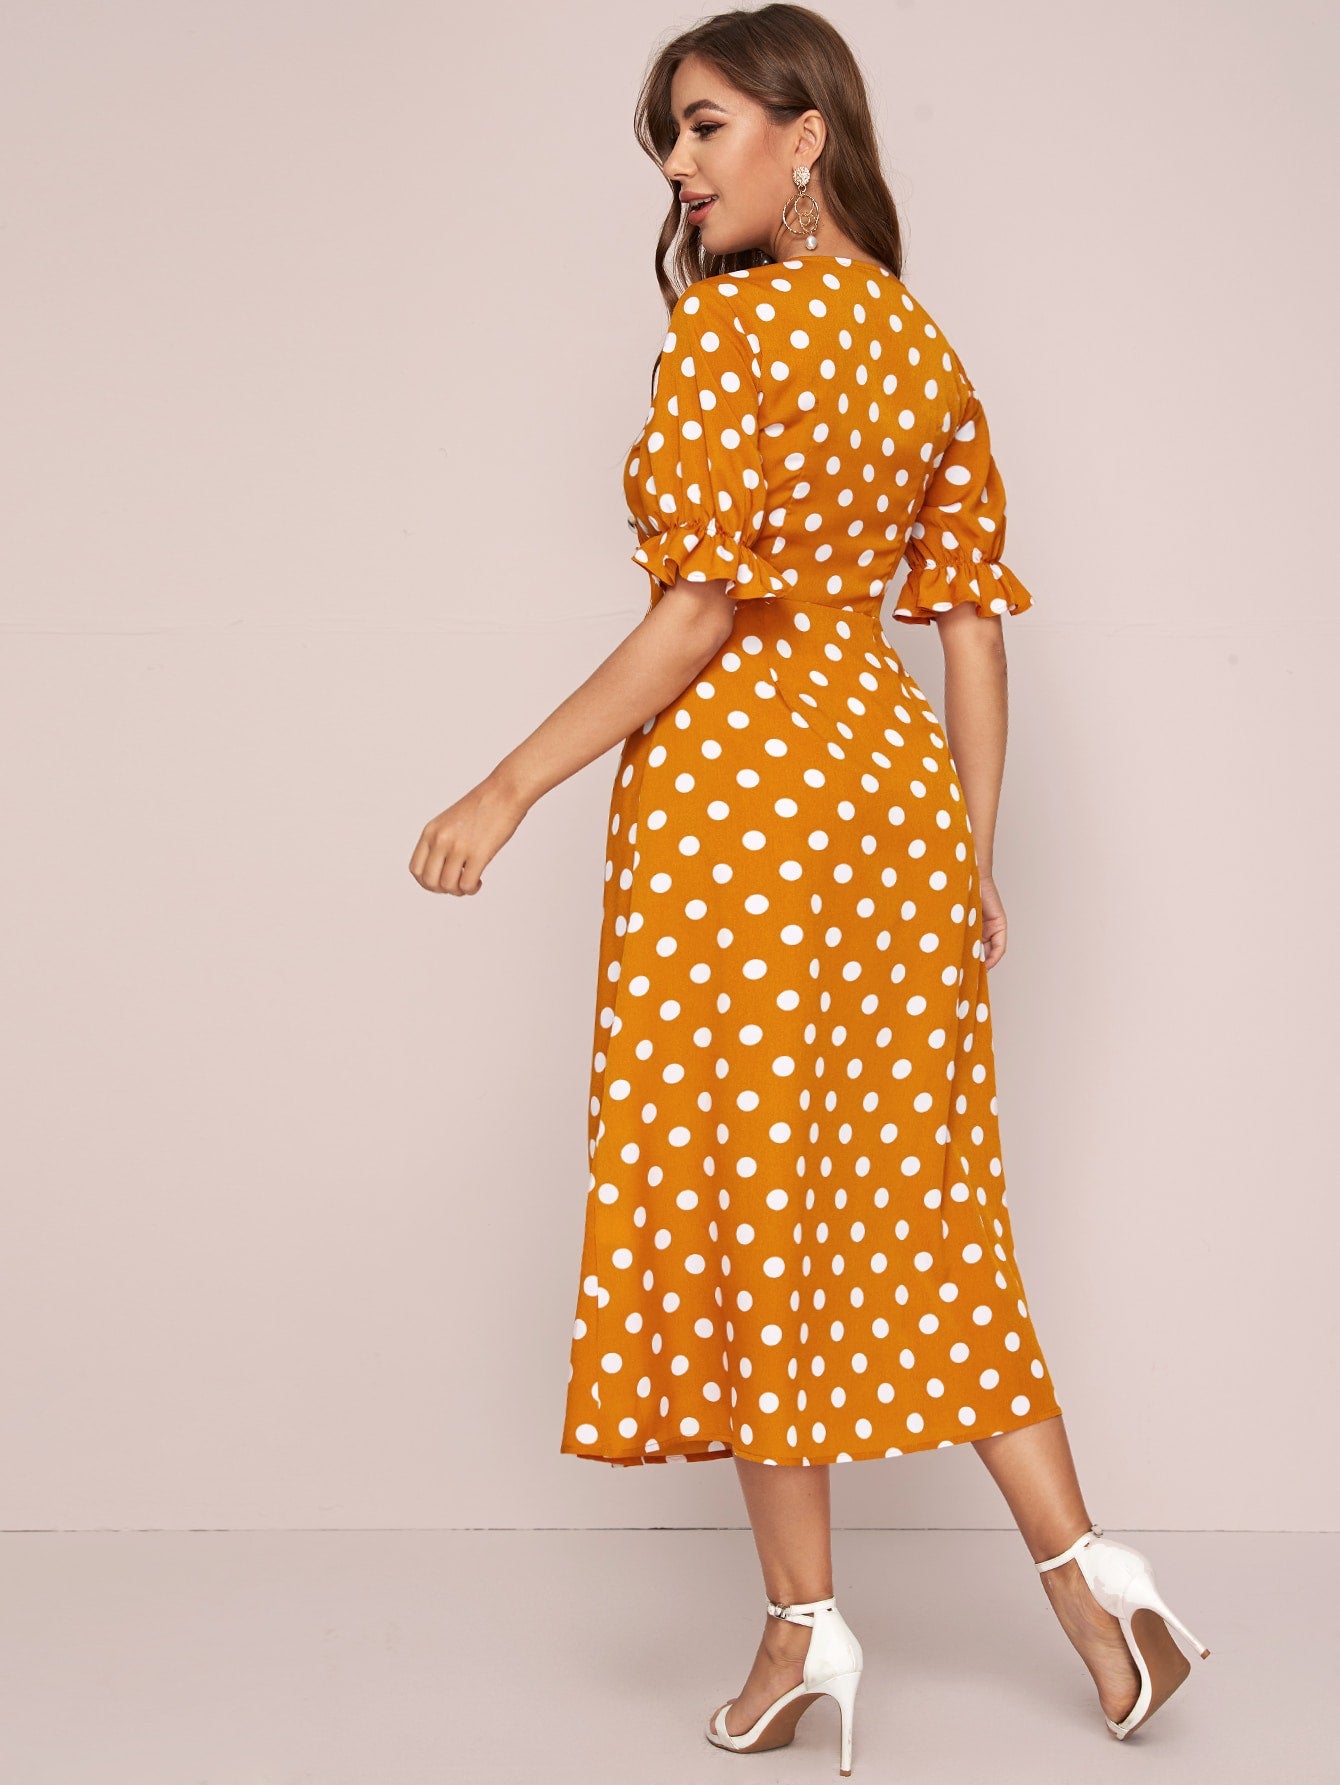 Notched Neck Ruched Buttoned Front Polka Dot Dress